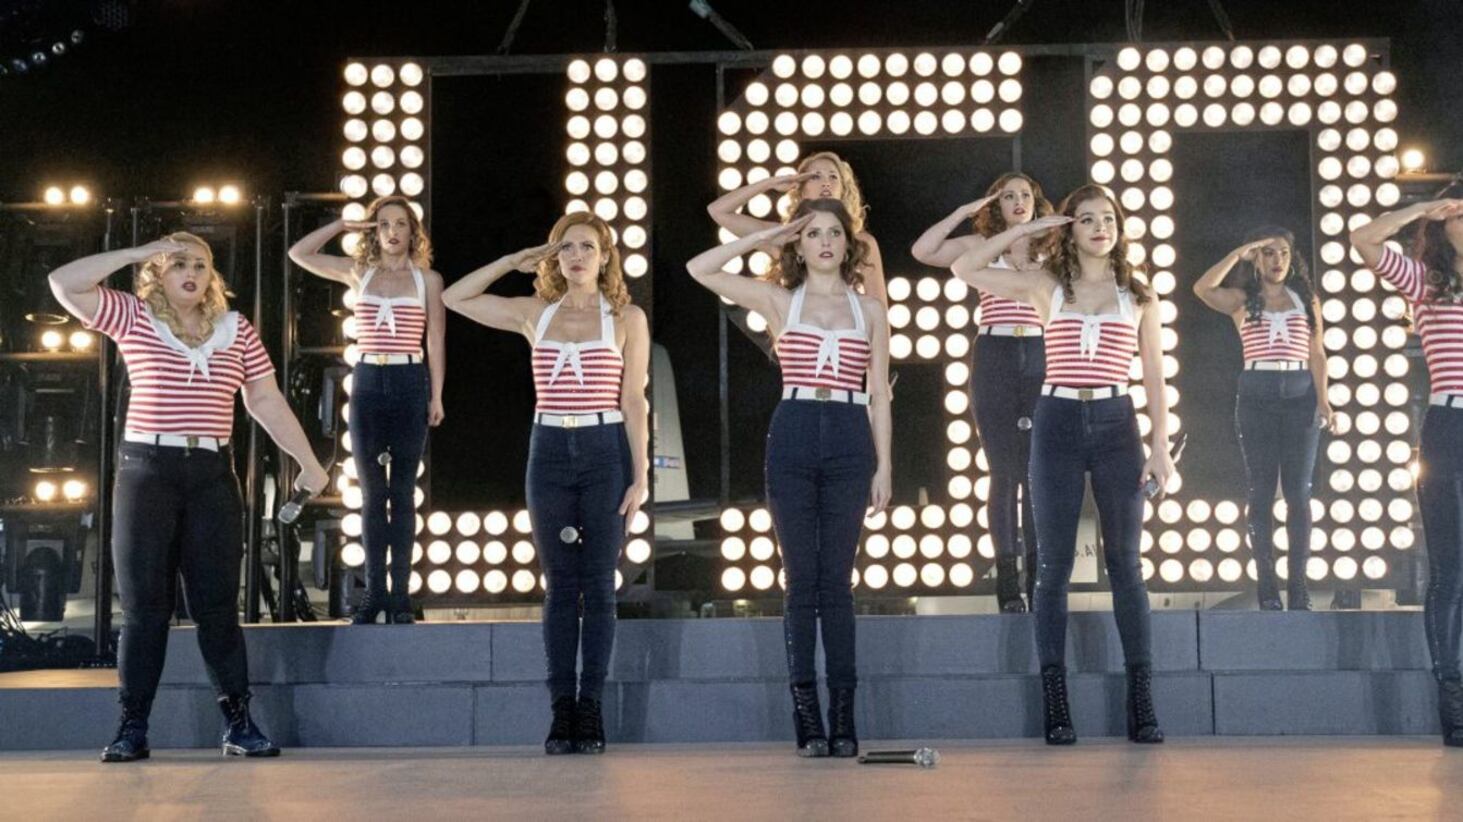 The cast of Pitch Perfect 3 includes Rebel Wilson , Kelley Jakle, Brittany Snow, Anna Kendrick, Anna Campy, Alexis Knapp, Hailee Steinfeld, Chrissie Fit and Hana Mae Lee 